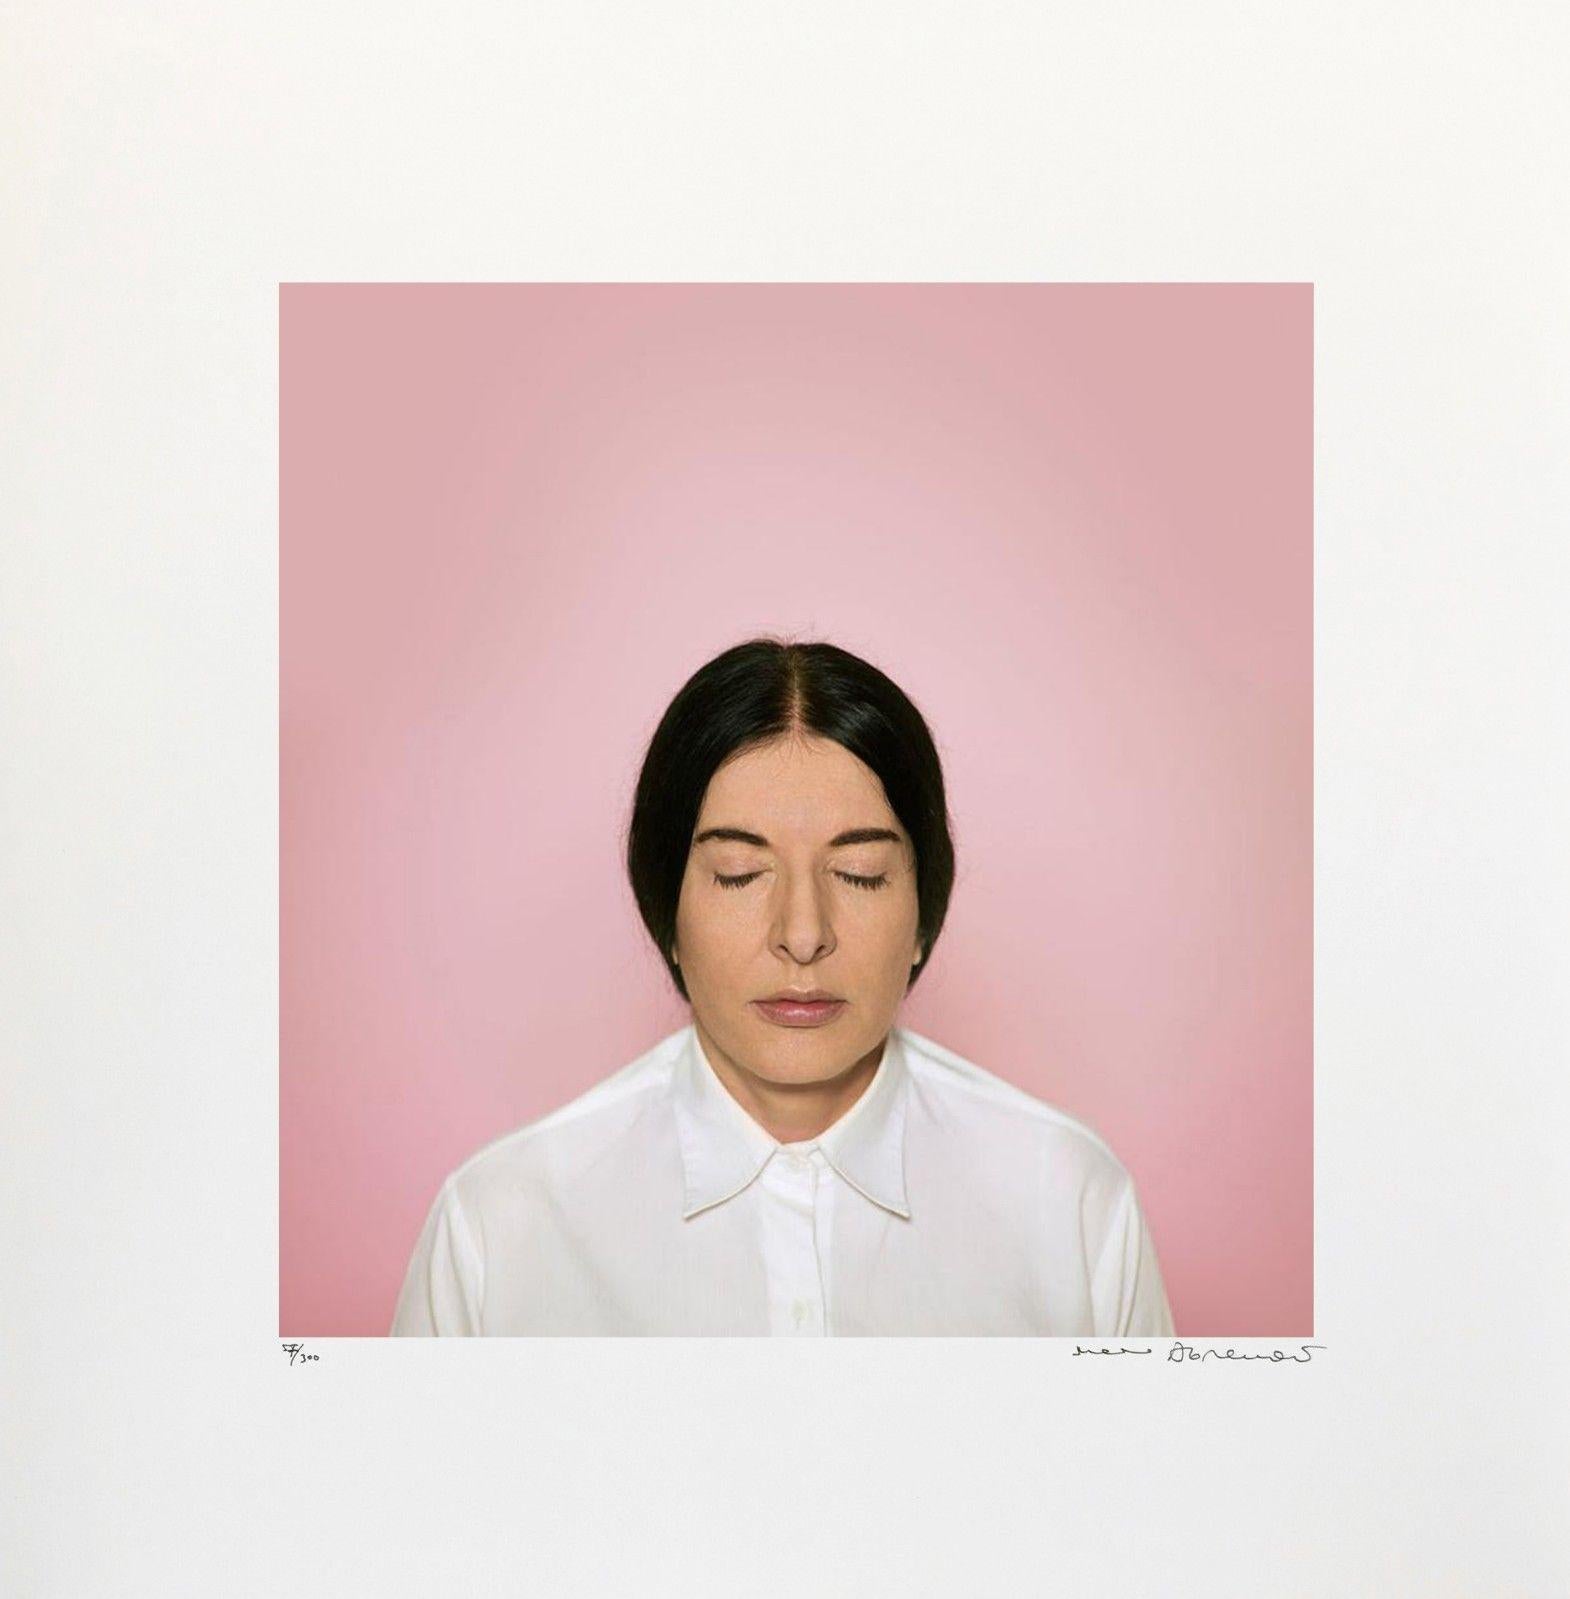 THE CURRENT - Print by Marina Abramovic